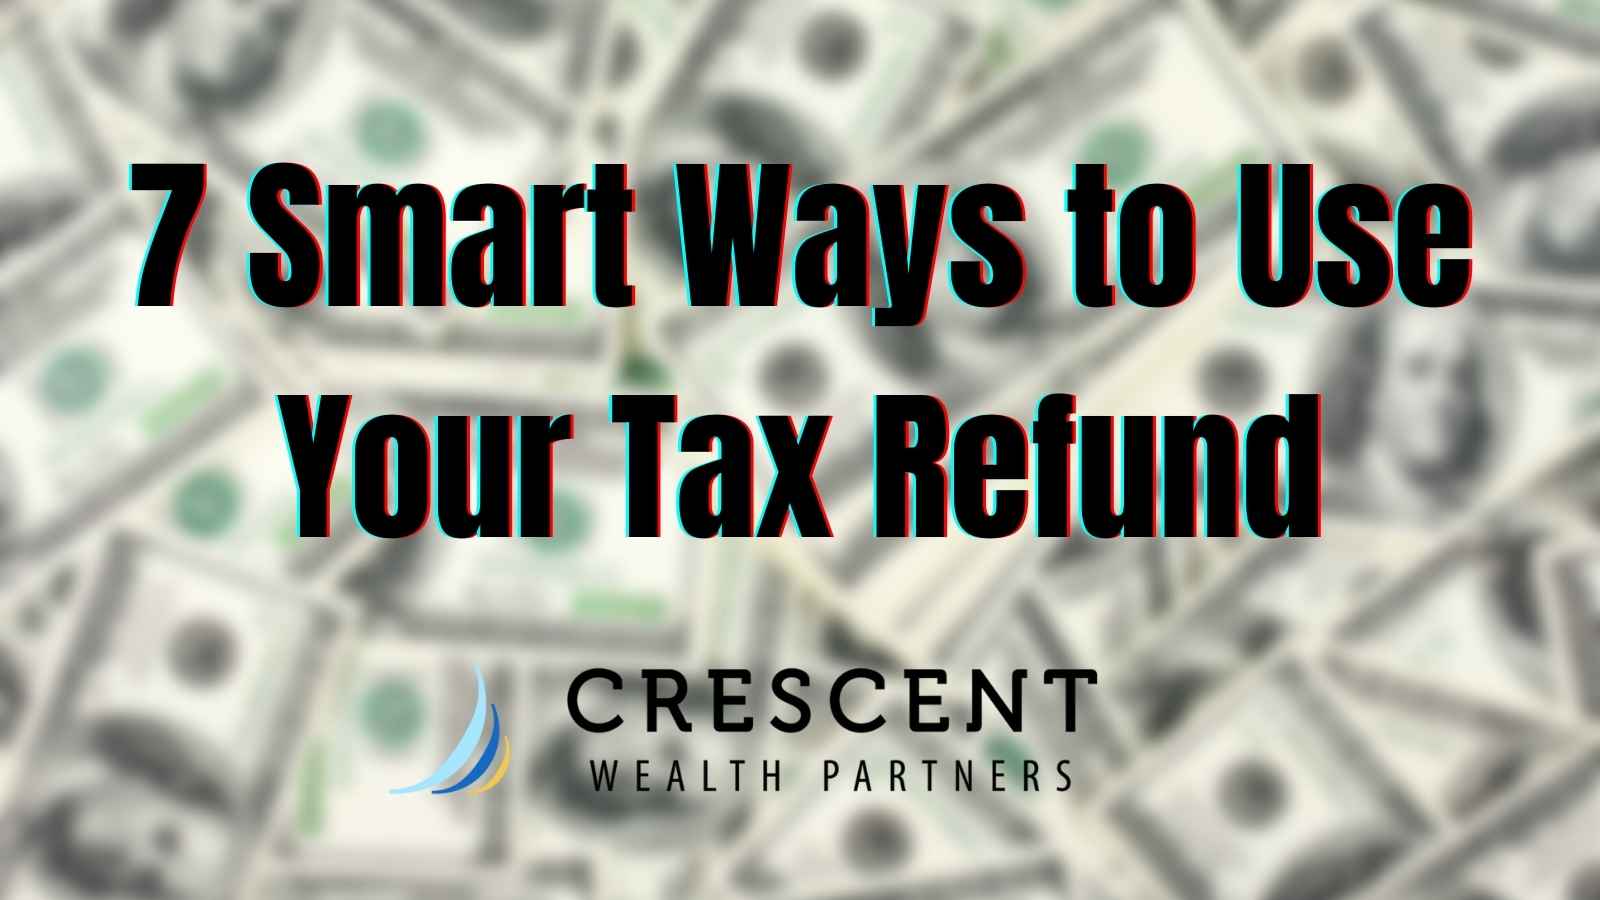 7 Smart Ways to Use Your Tax Refund